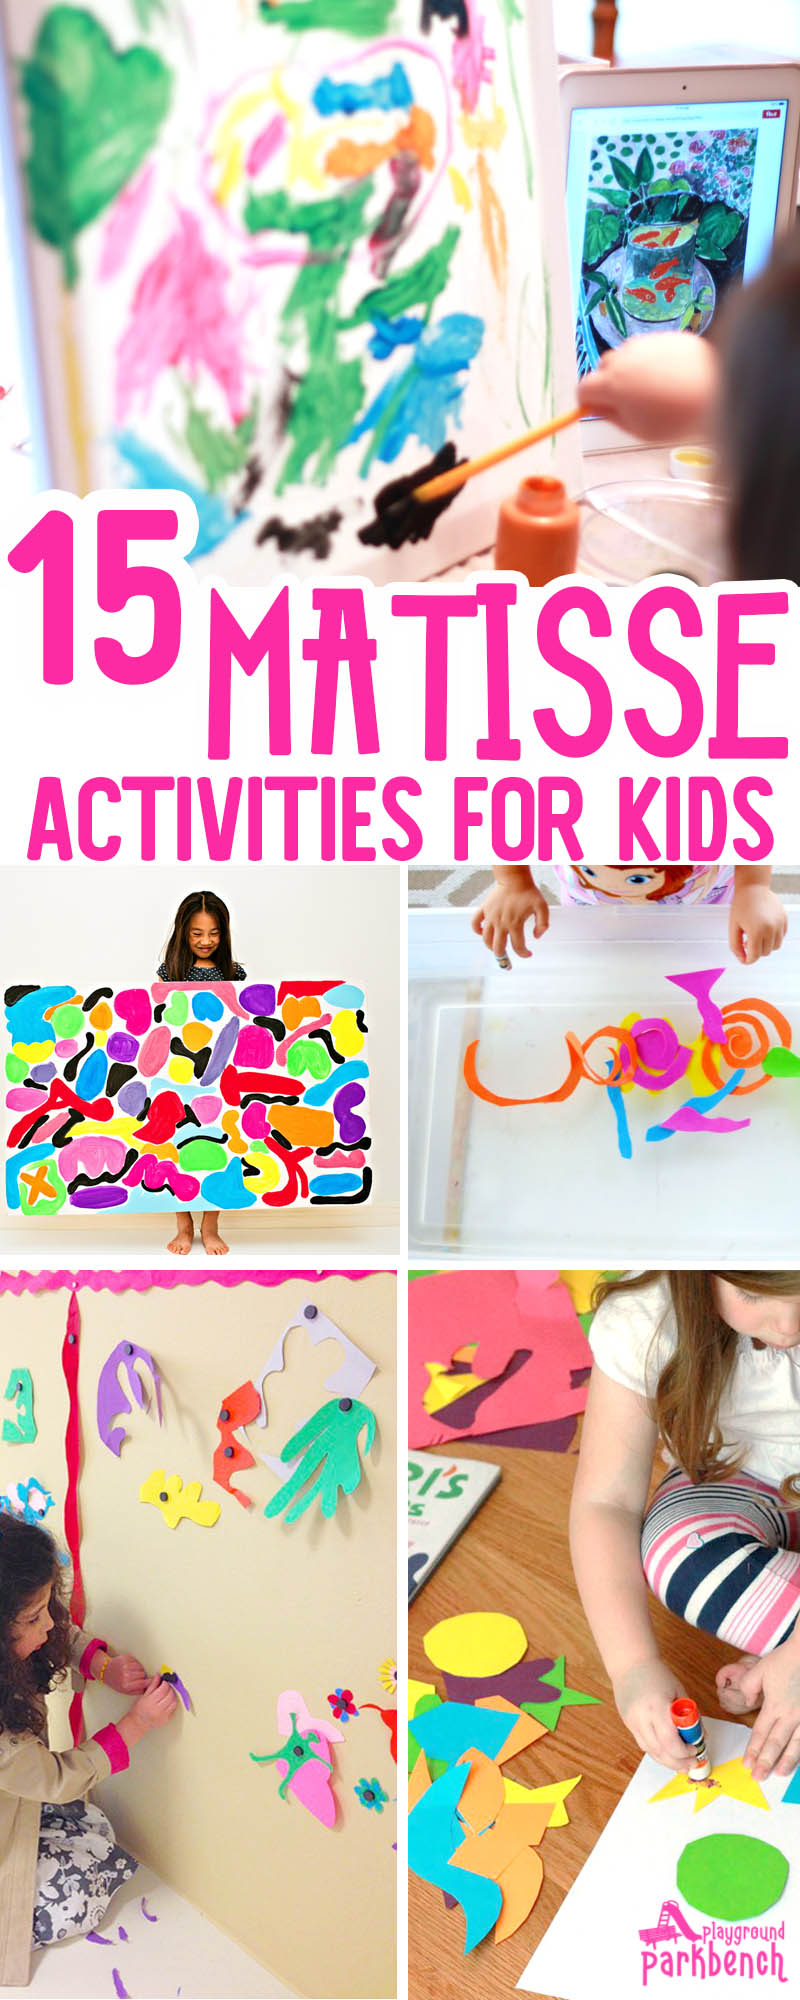 Matisse Art Projects for Kids - art and hands-on activities inspired by the bold colors and organic shapes used by Henri Matisse. An awesome Art Study for Kids of all ages | Art for Kids | Art for Preschool |